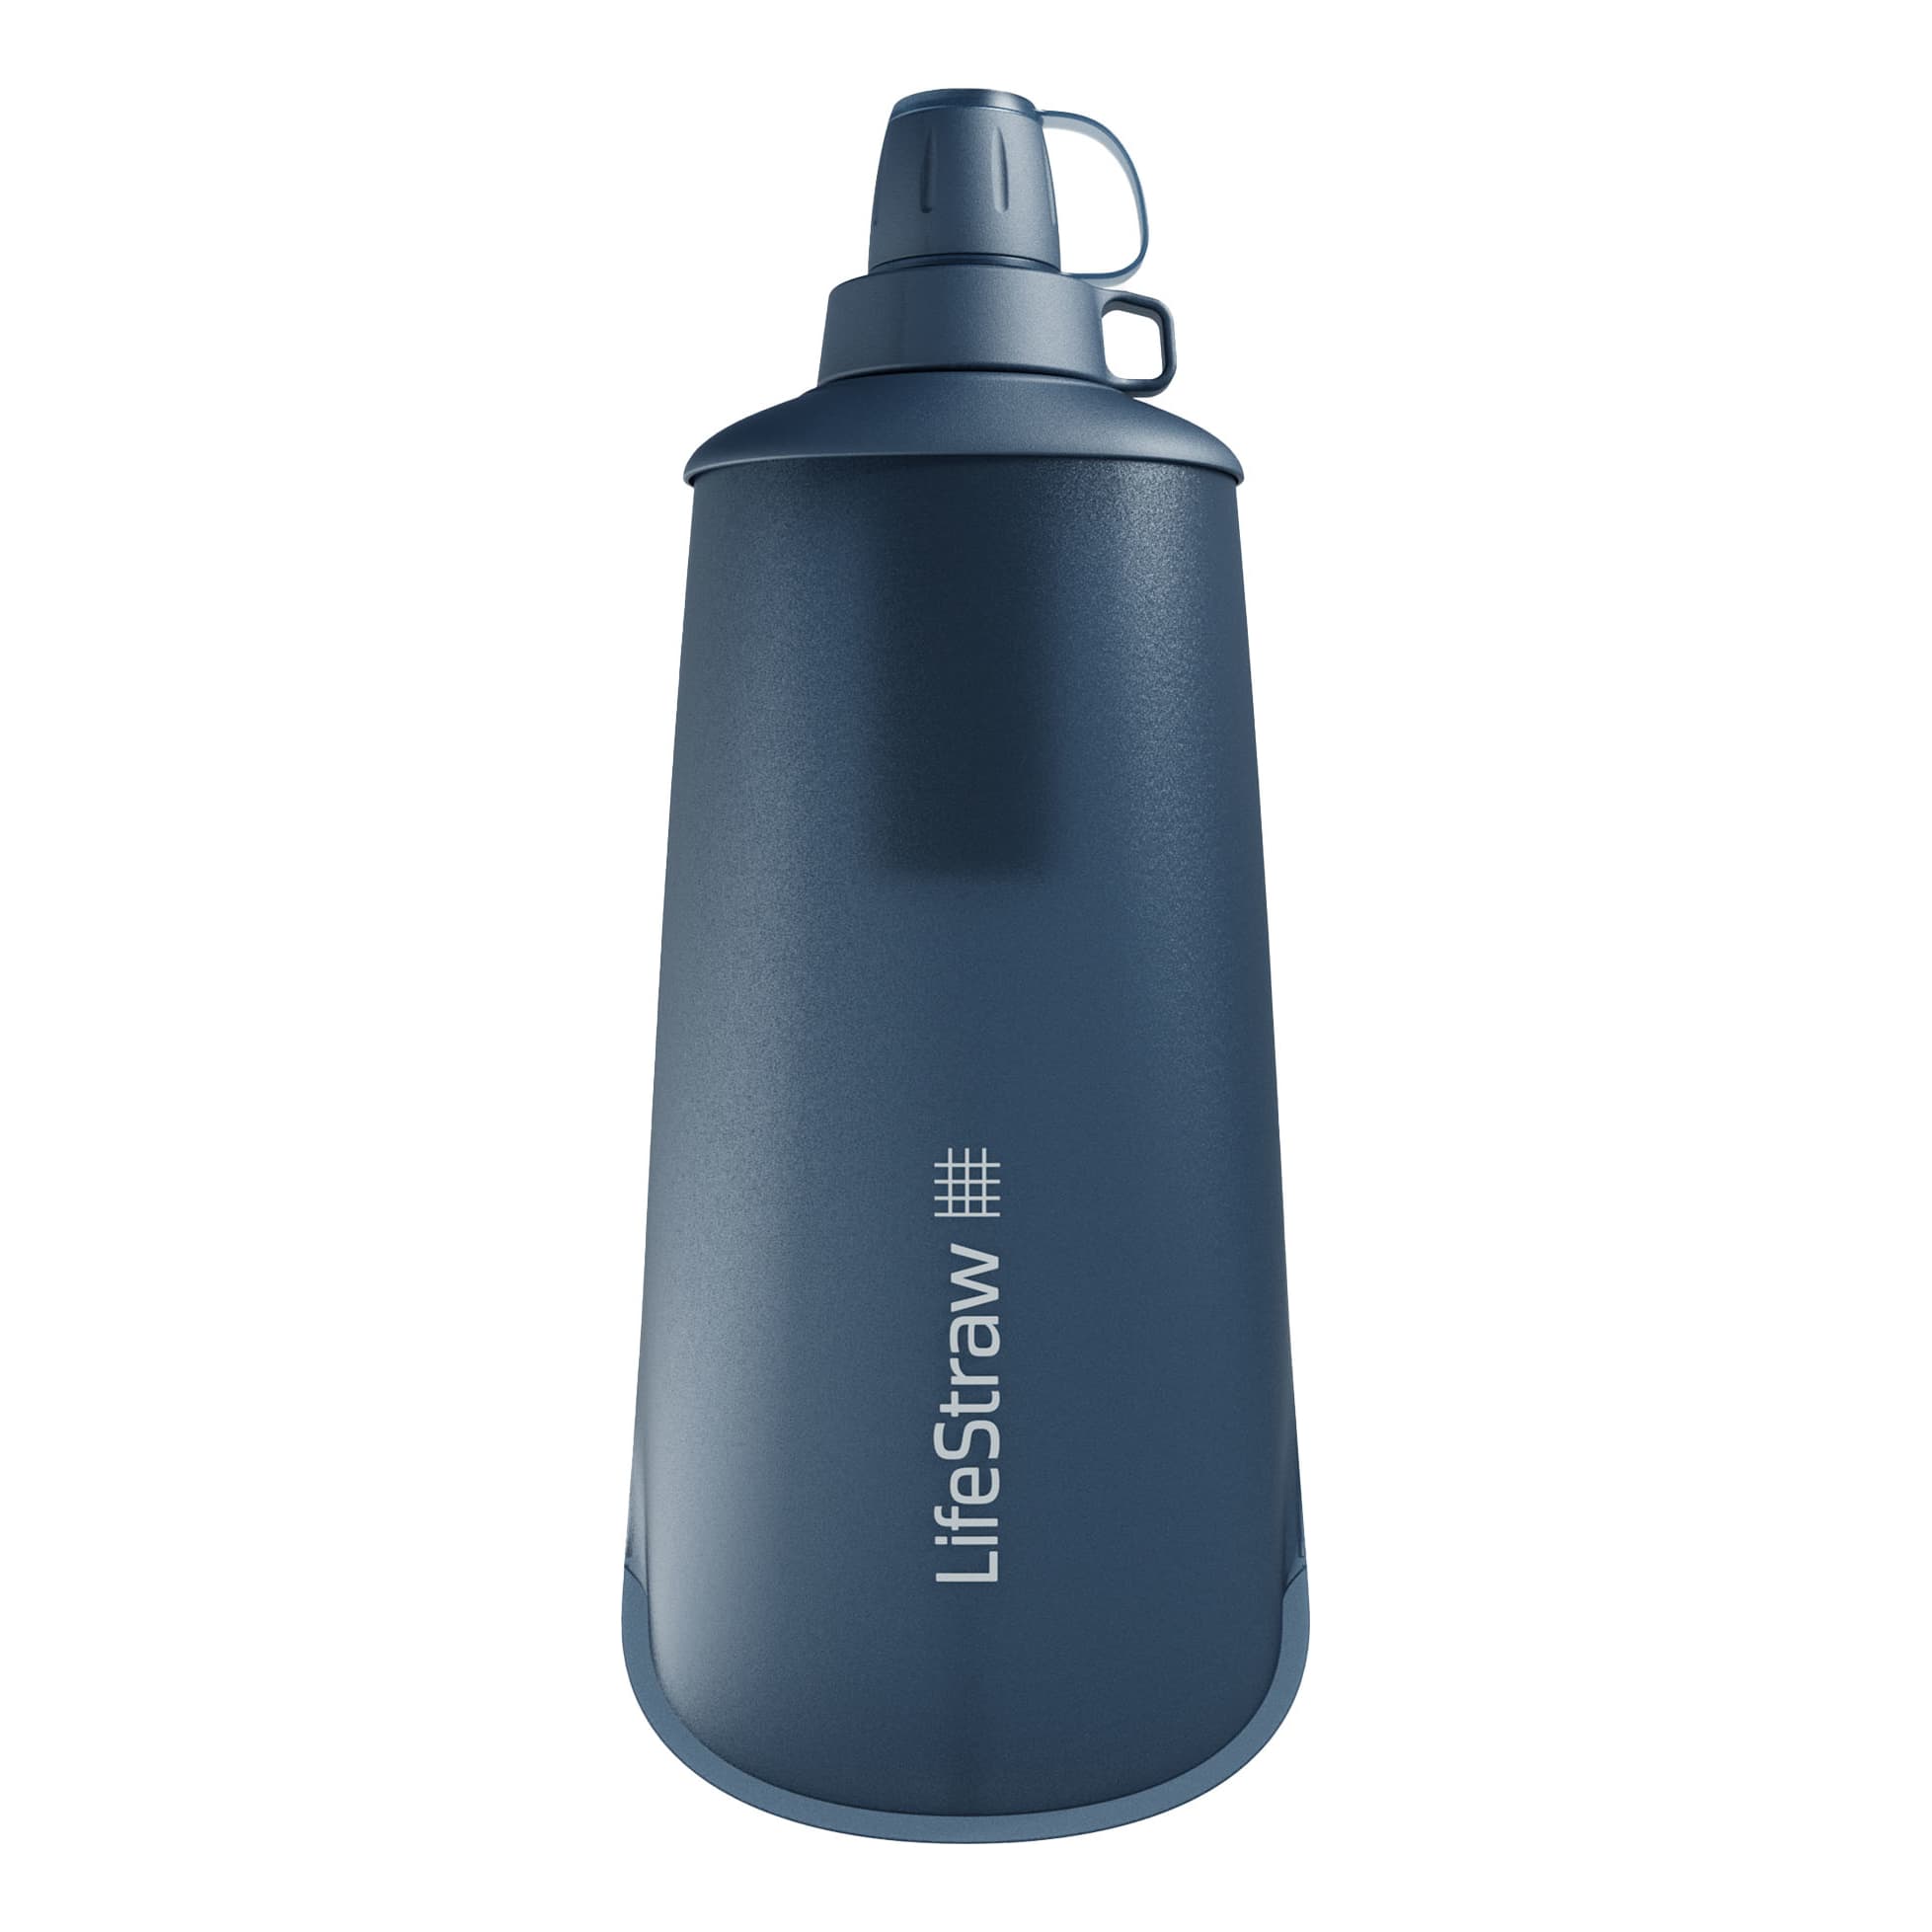 LifeStraw® Peak Series Collapsible Squeeze Bottle with Filter - 1 L